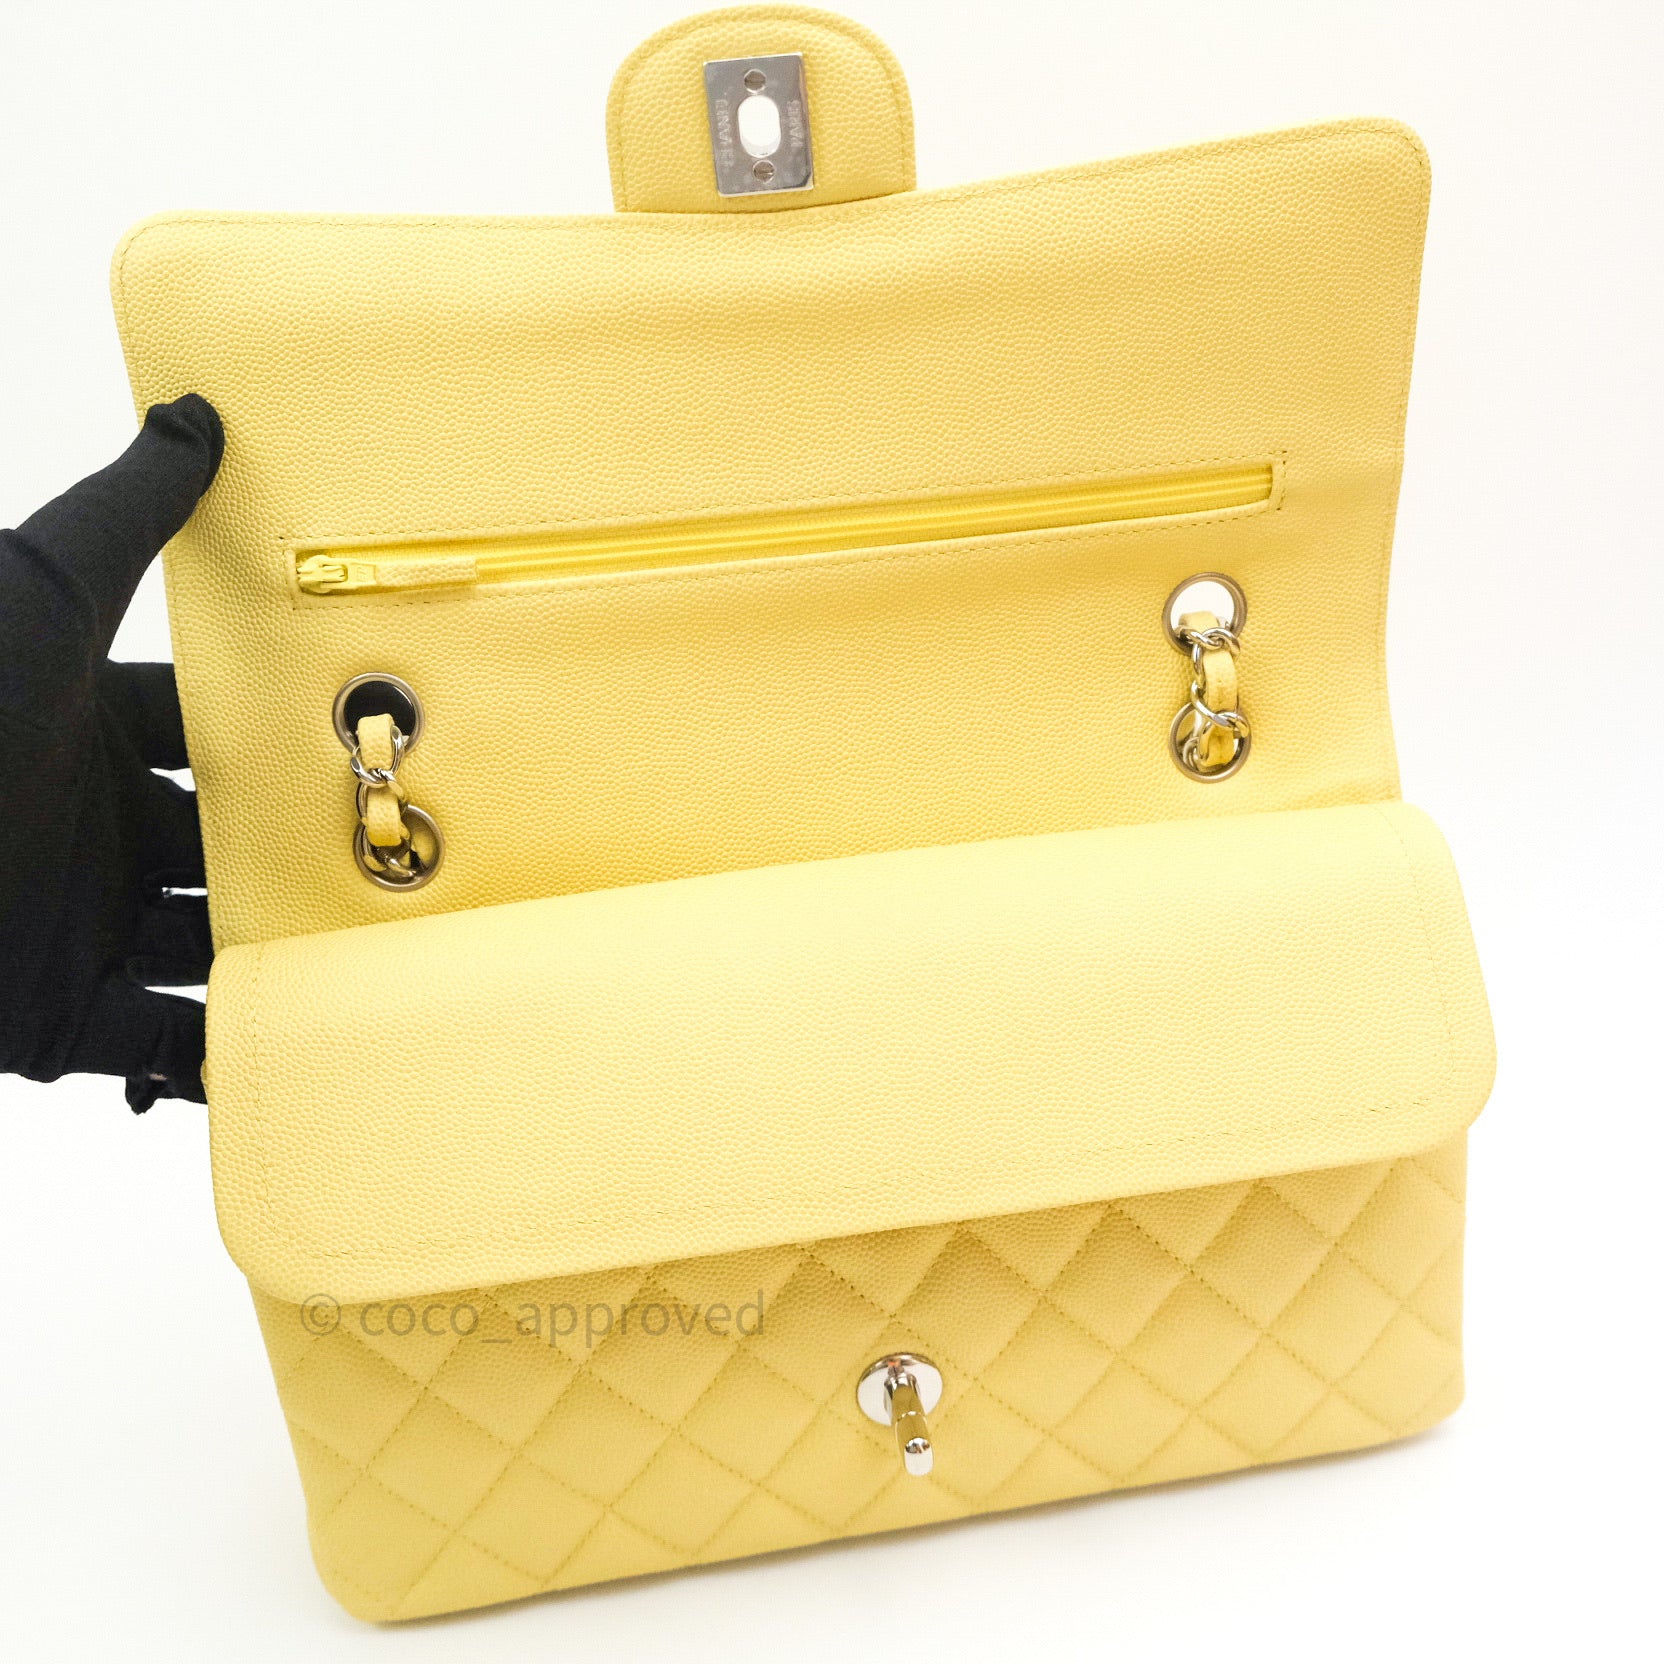 CHANEL CLASSIC DOUBLE Flap Yellow Iridescent *Authentic* Brand New, Never  Used $8,000.00 - PicClick